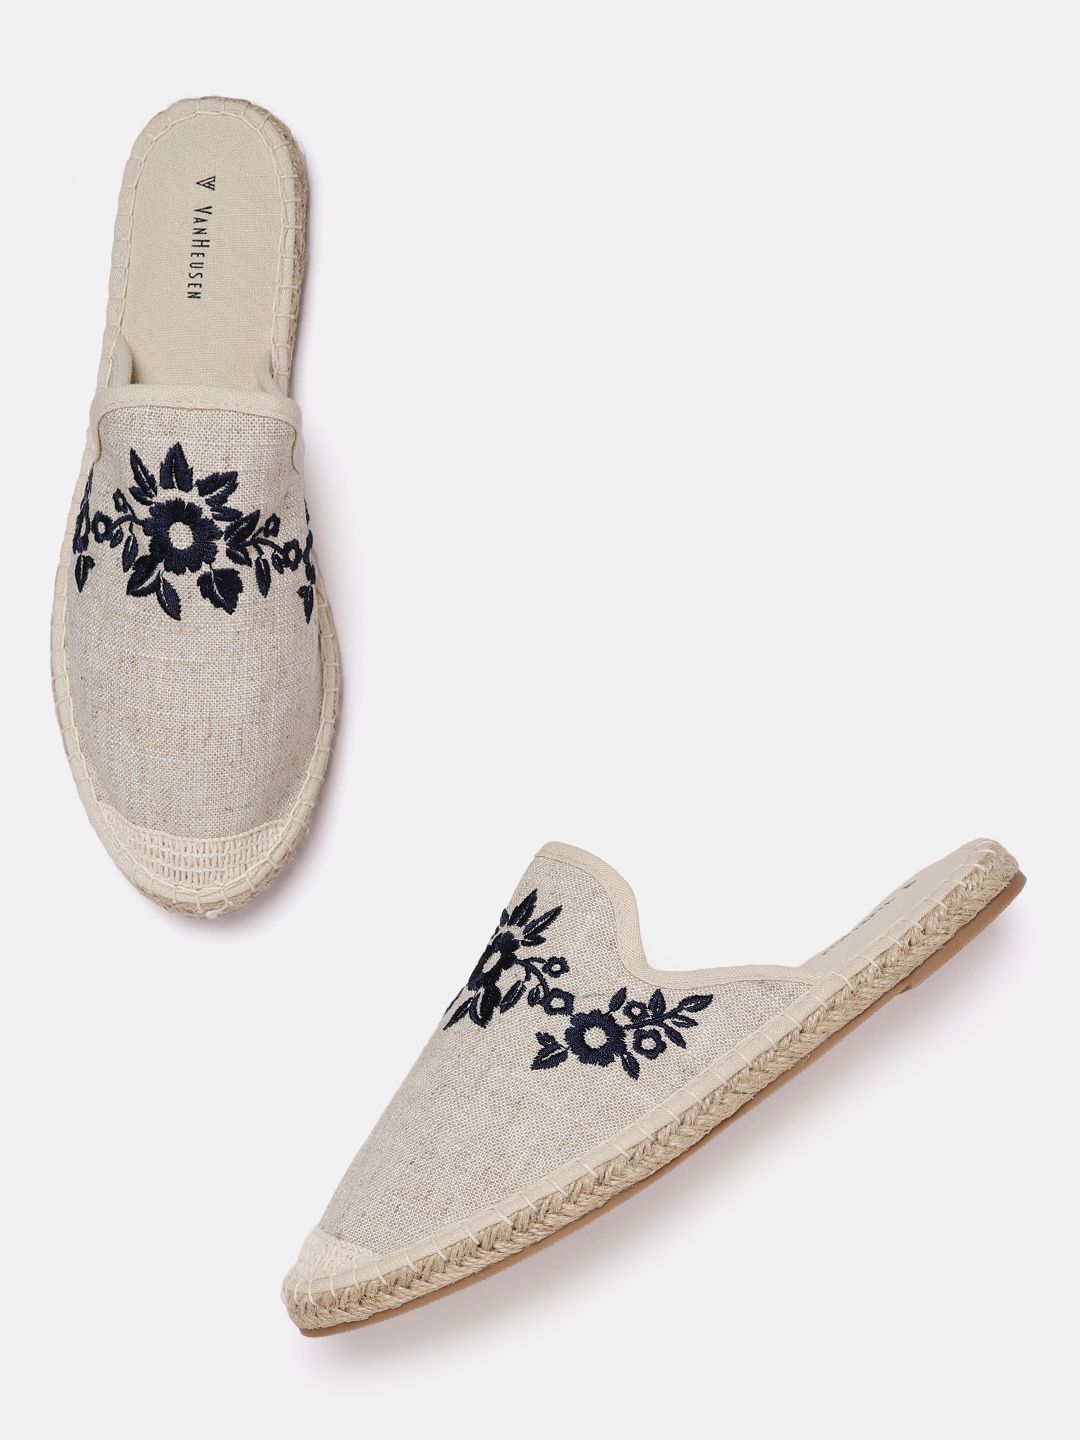 Van Heusen Woman Beige & Navy Floral Embroidered Espadrilles Mules Price in India